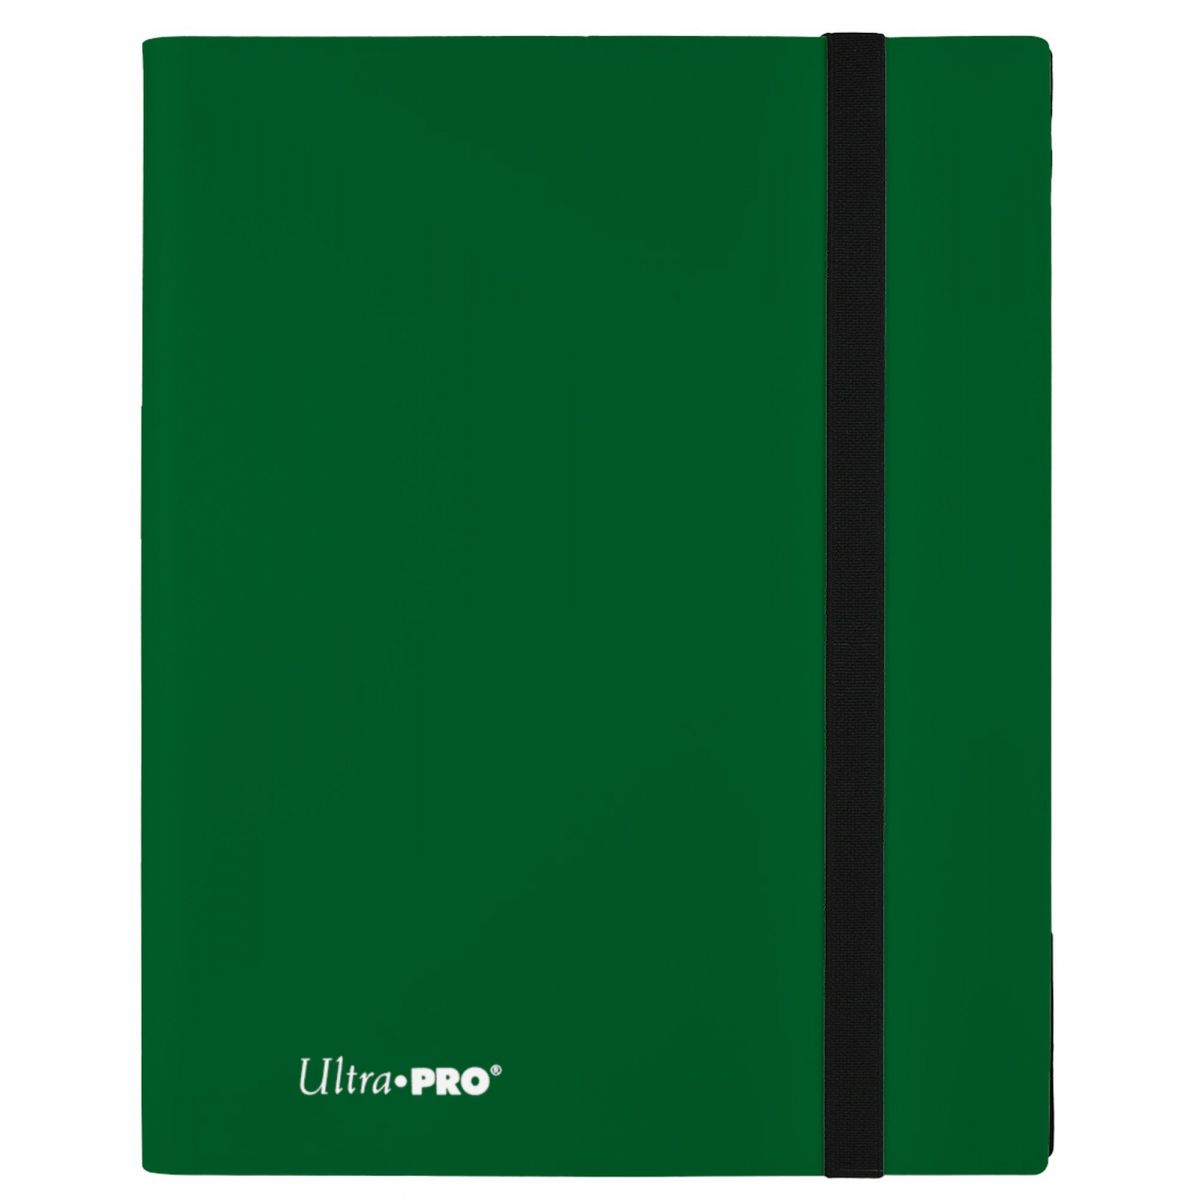 Ultra Pro - Pro Binder - Eclipse - 9 Cases - Forest Green (360)